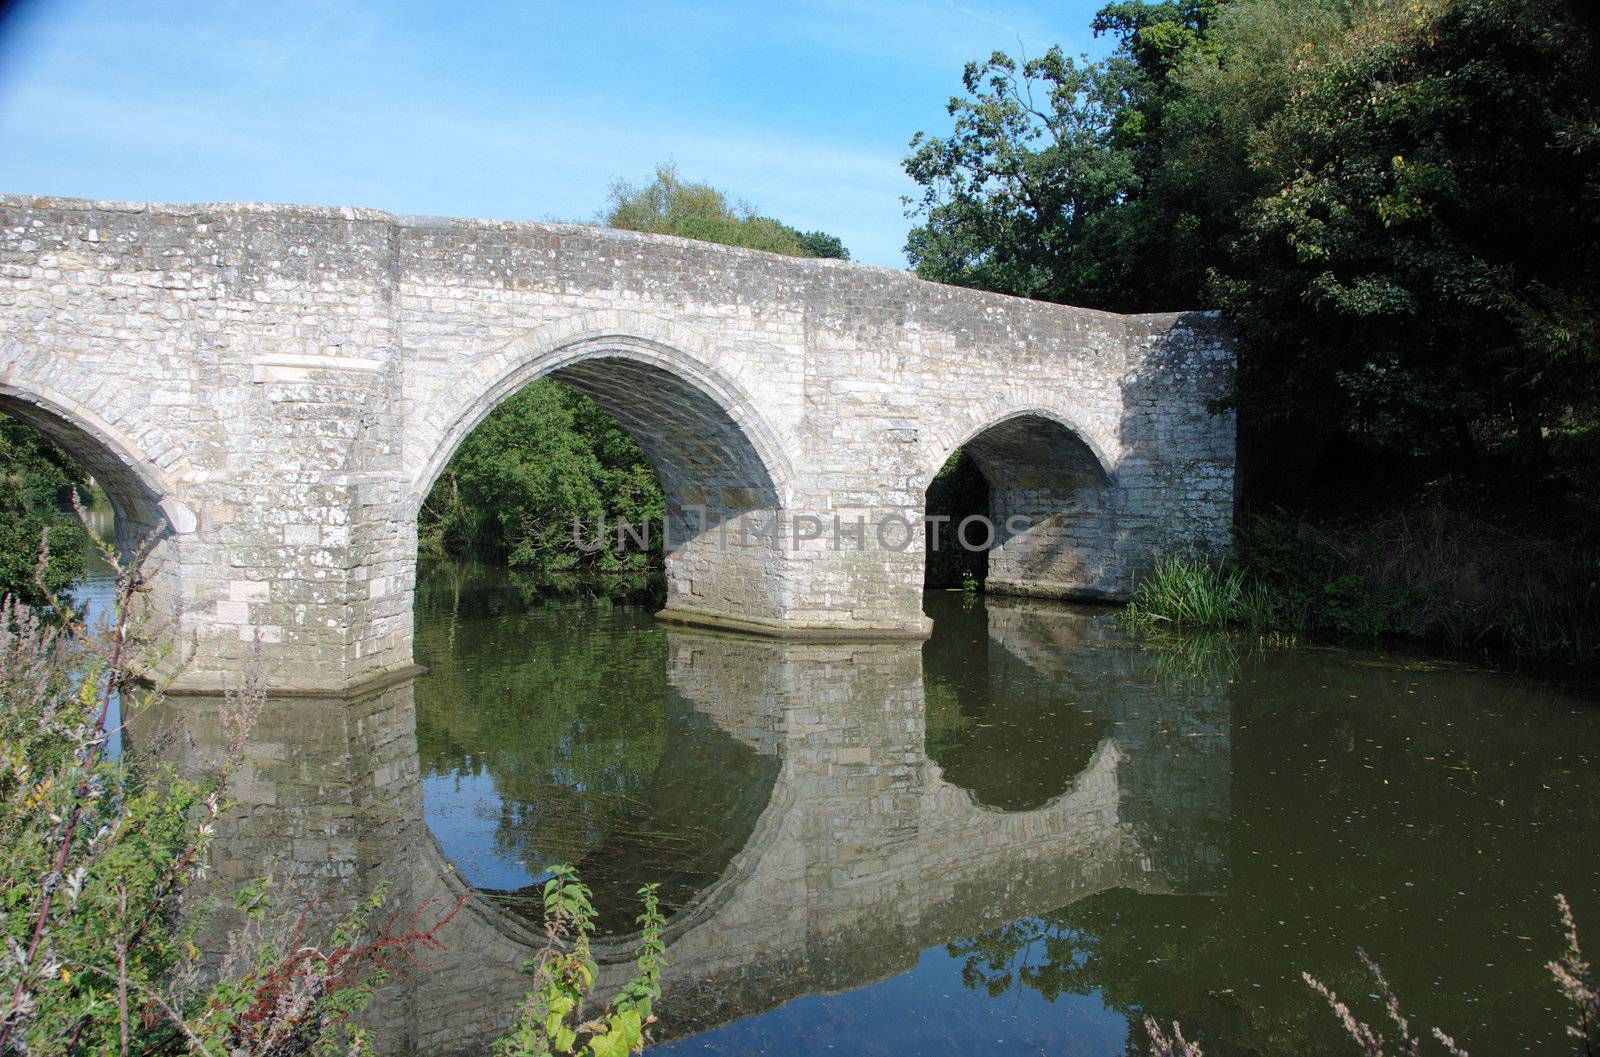 Teston Bridge,this medievel bridge leads to the village of Teston which is the home of cricket ball making